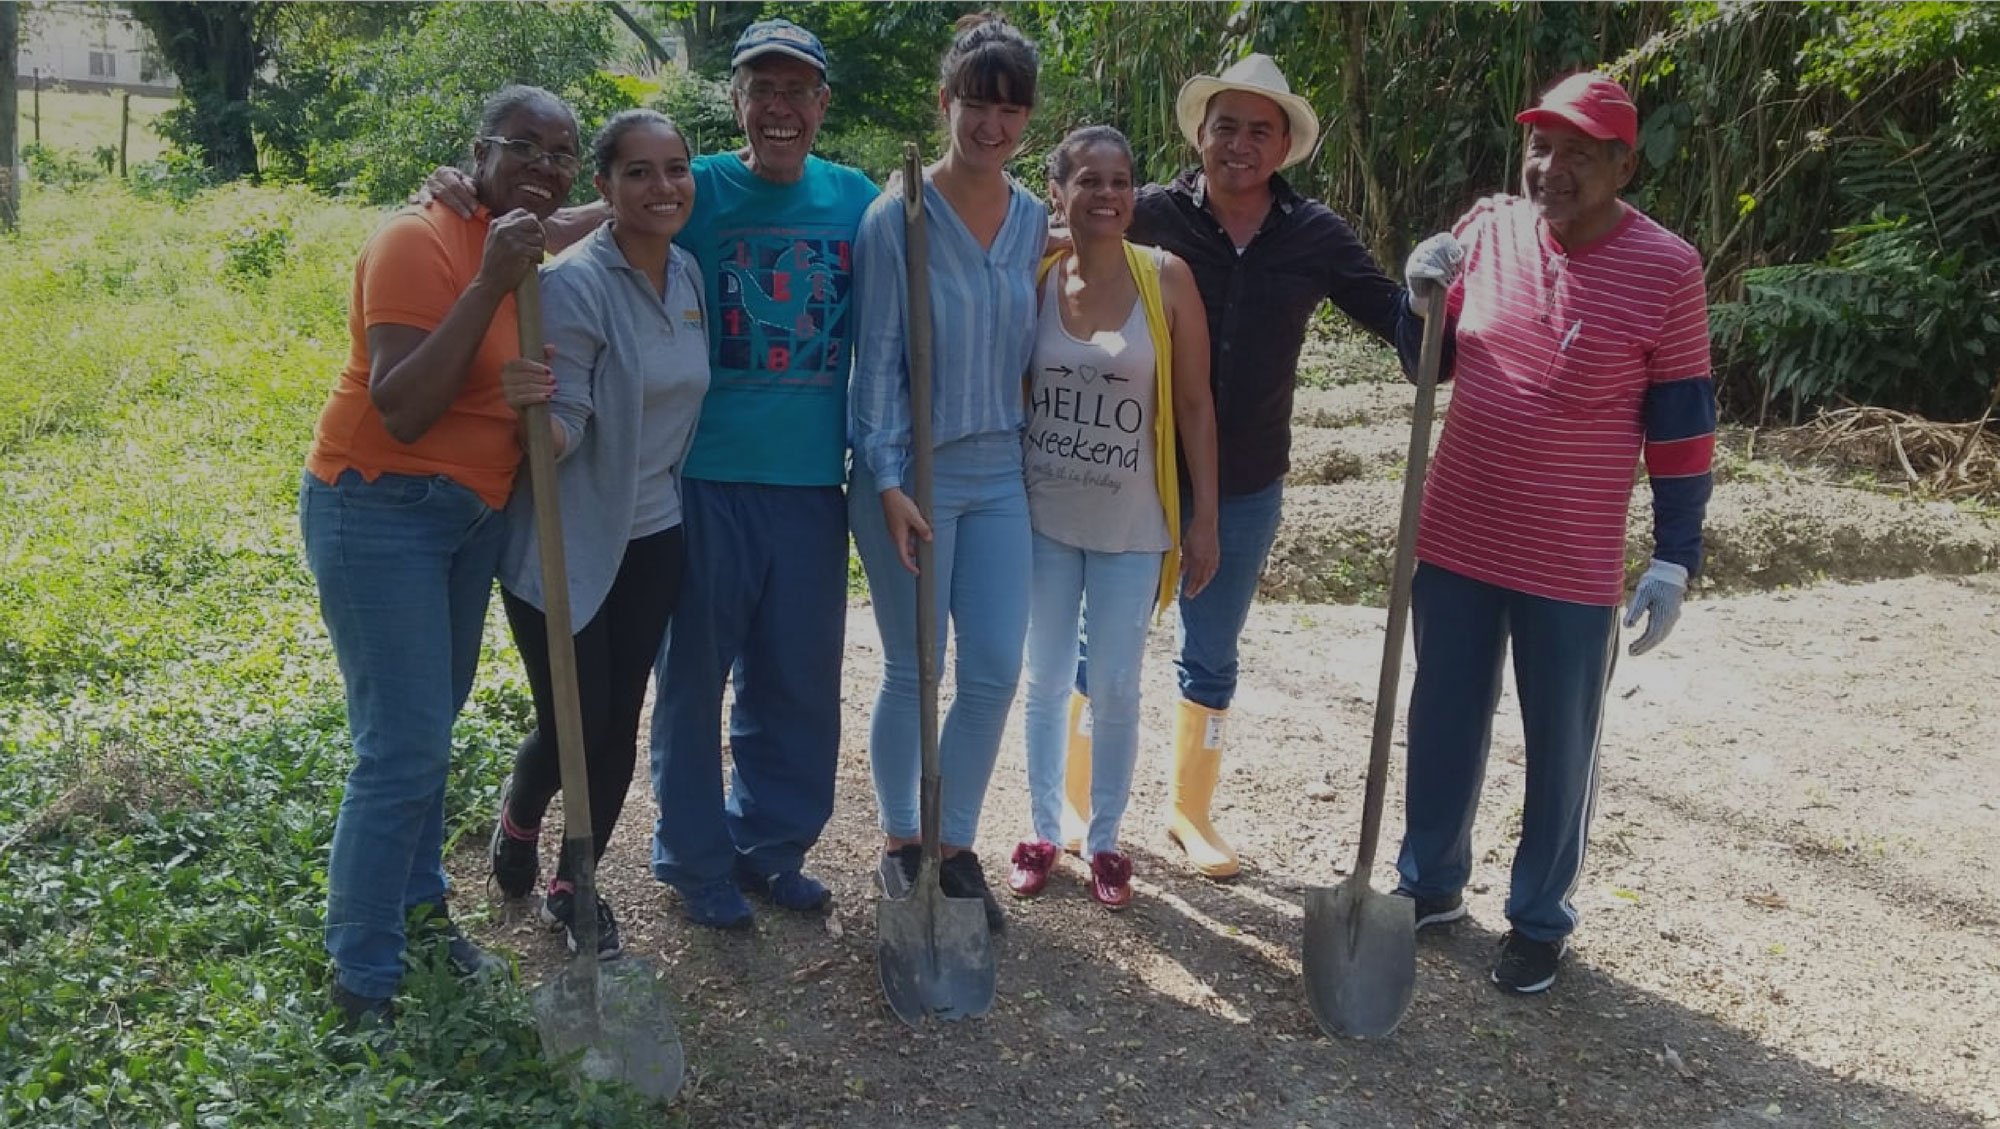 Anna's experiences with FUNDAEC in Colombia